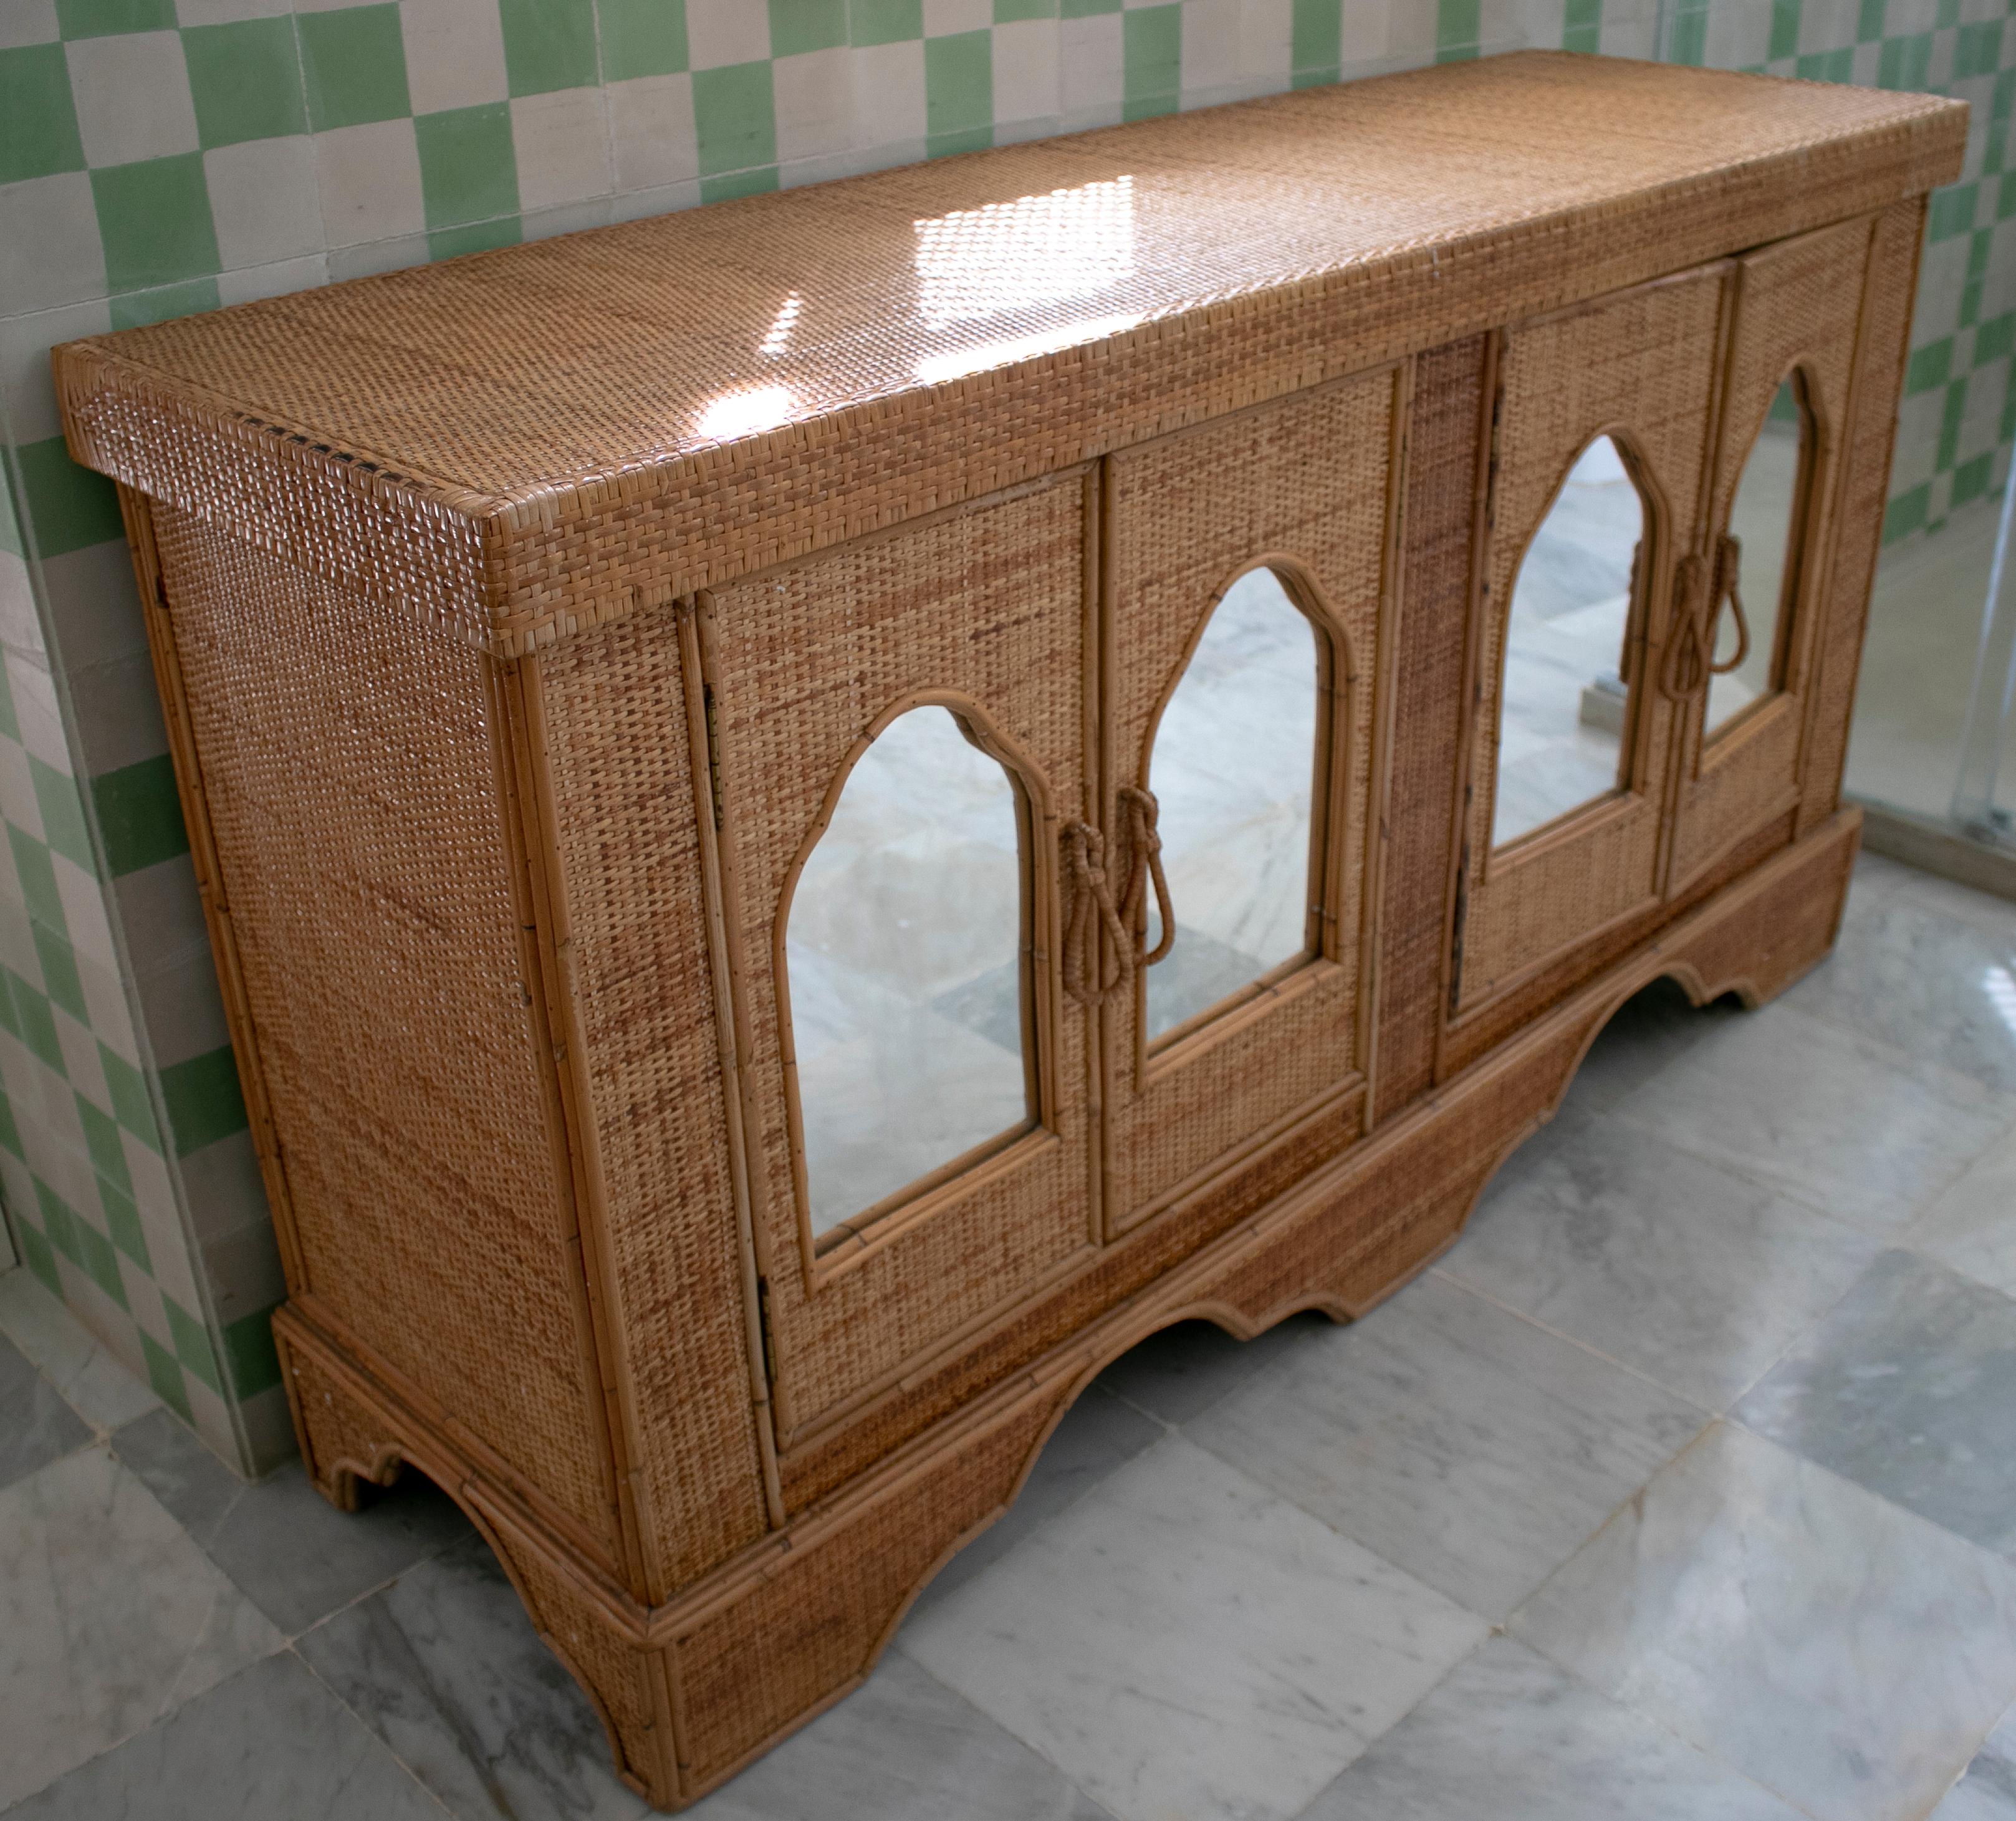 1970s Spanish wicker four-door sideboard with drawers.